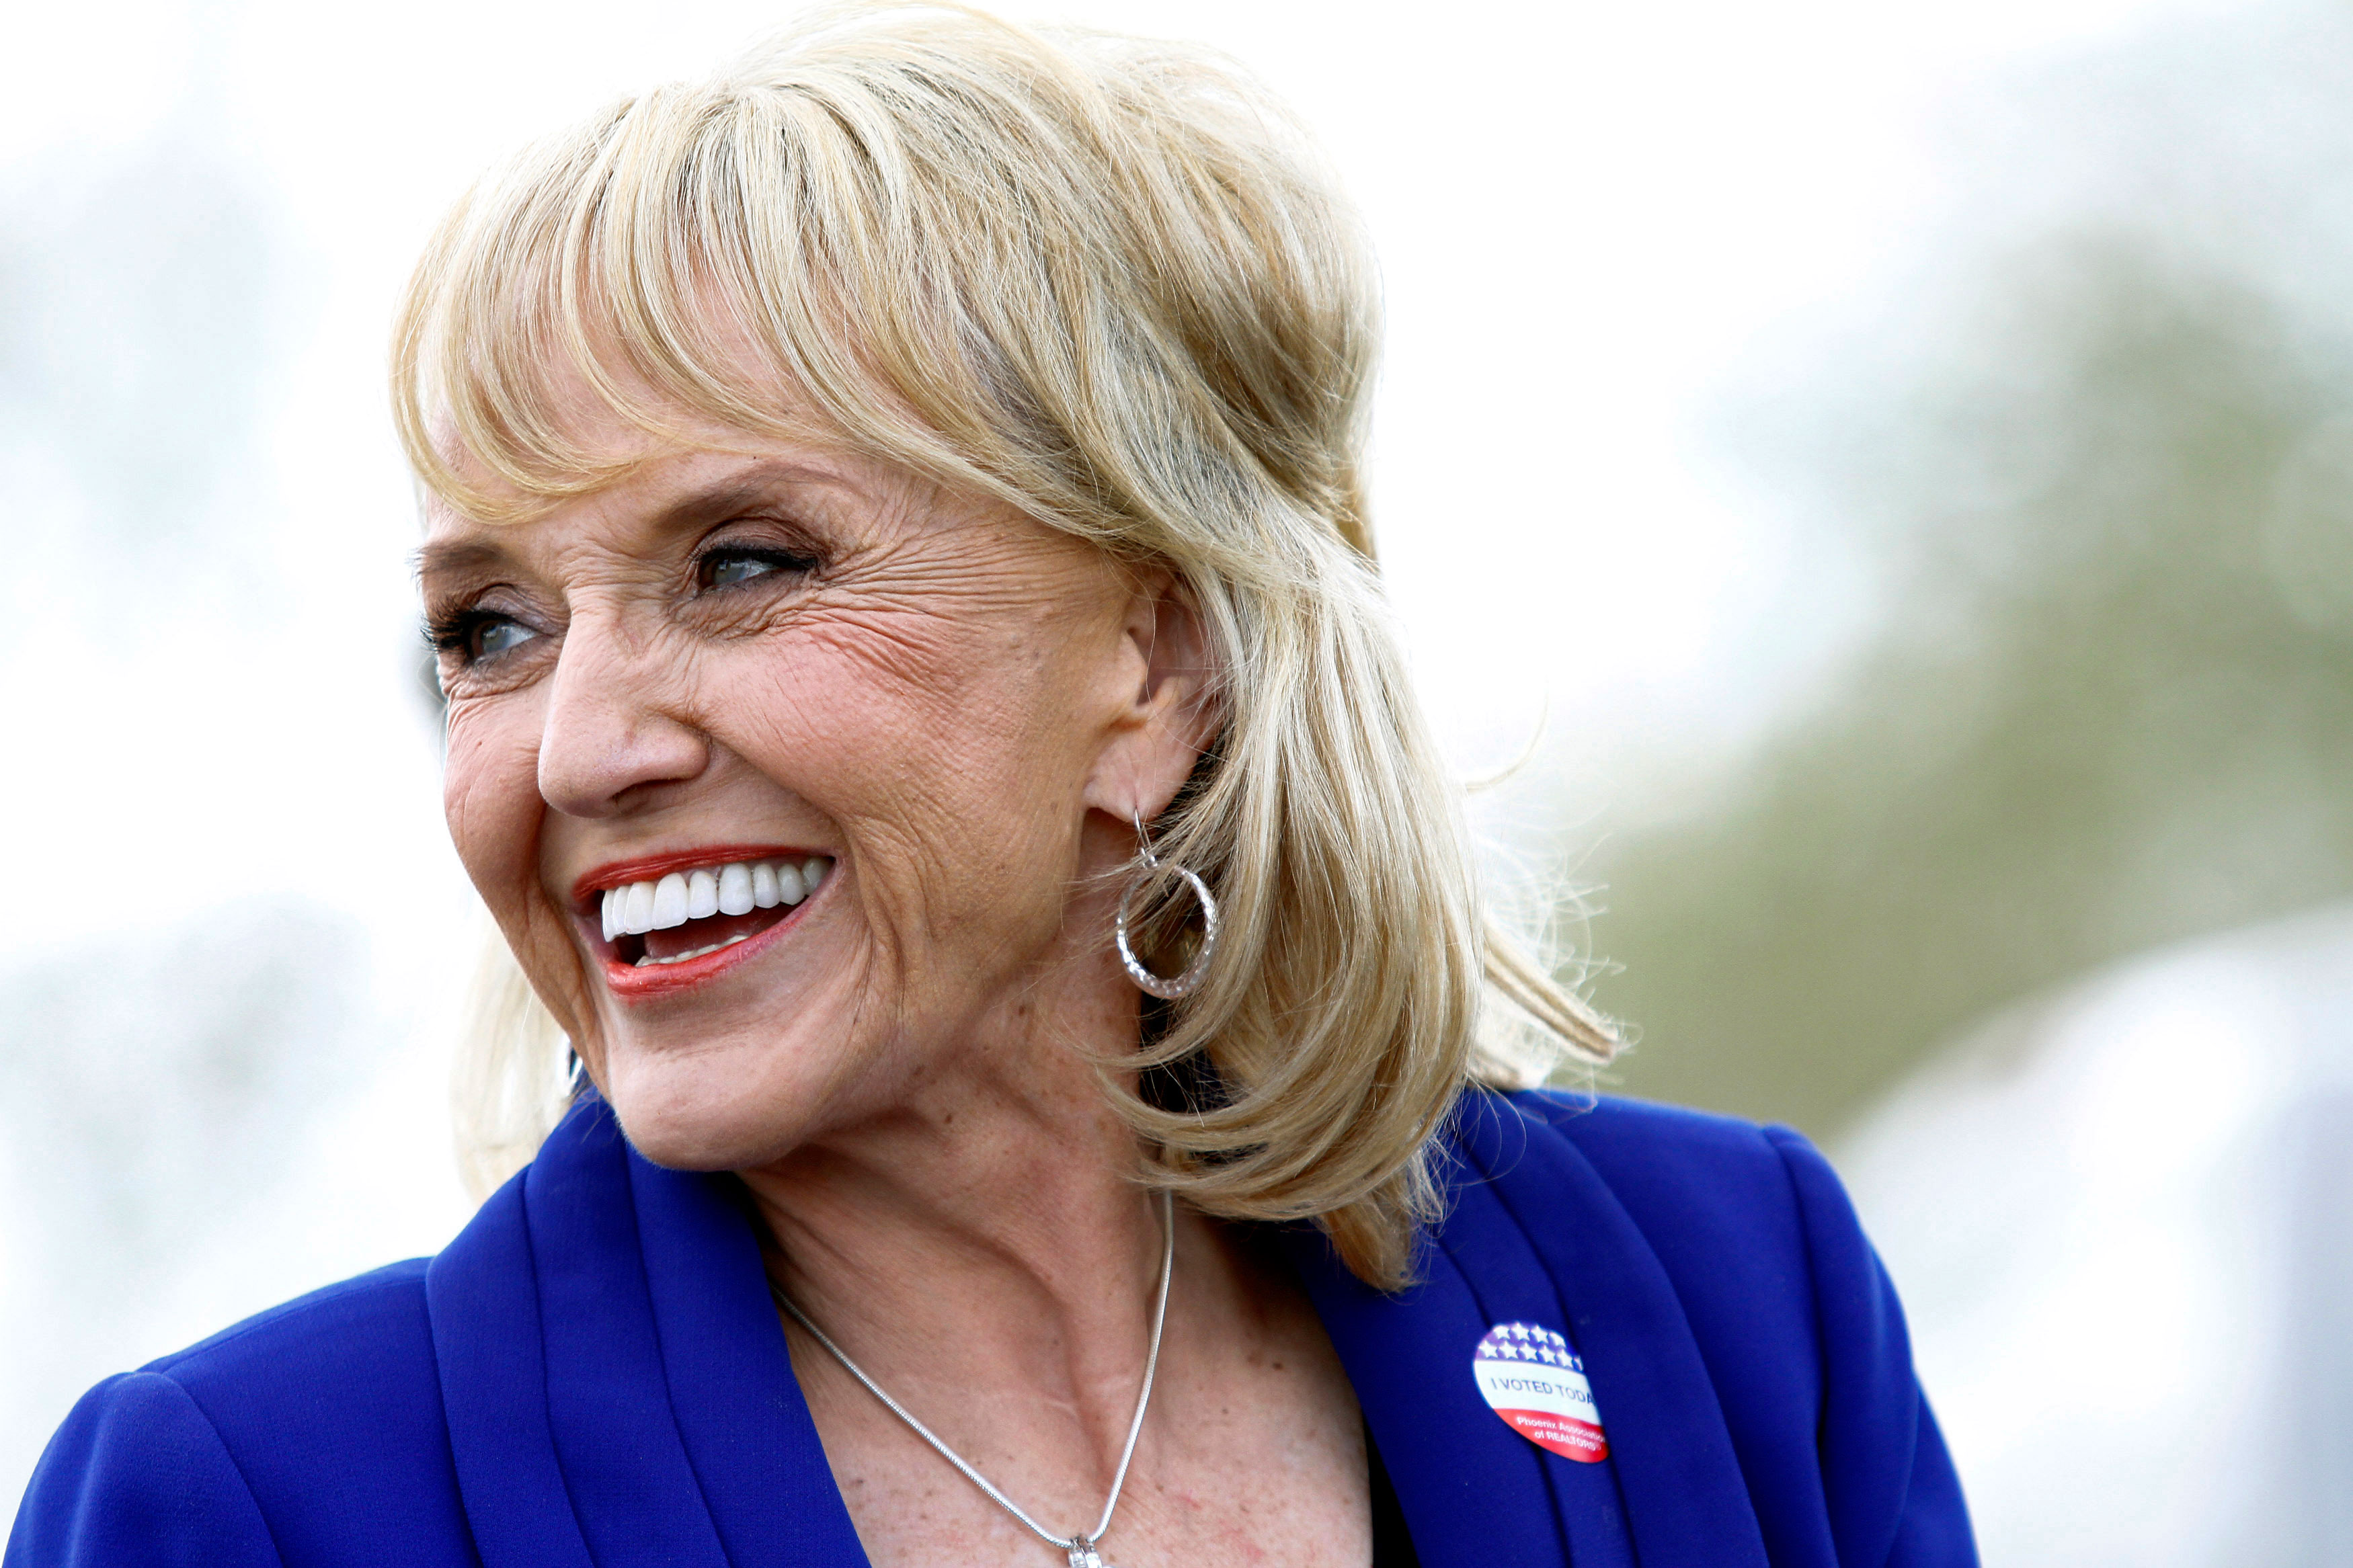 		&lt;p&gt;Governor Jan Brewer of Arizona is the 4th women to serve in that capacity. Brewer provoked a national controversy when, on April 23, 2010, she signed the Support Our Law Enforcement and Safe Neighborhoods Act. The act makes it a state misdemeanor cri